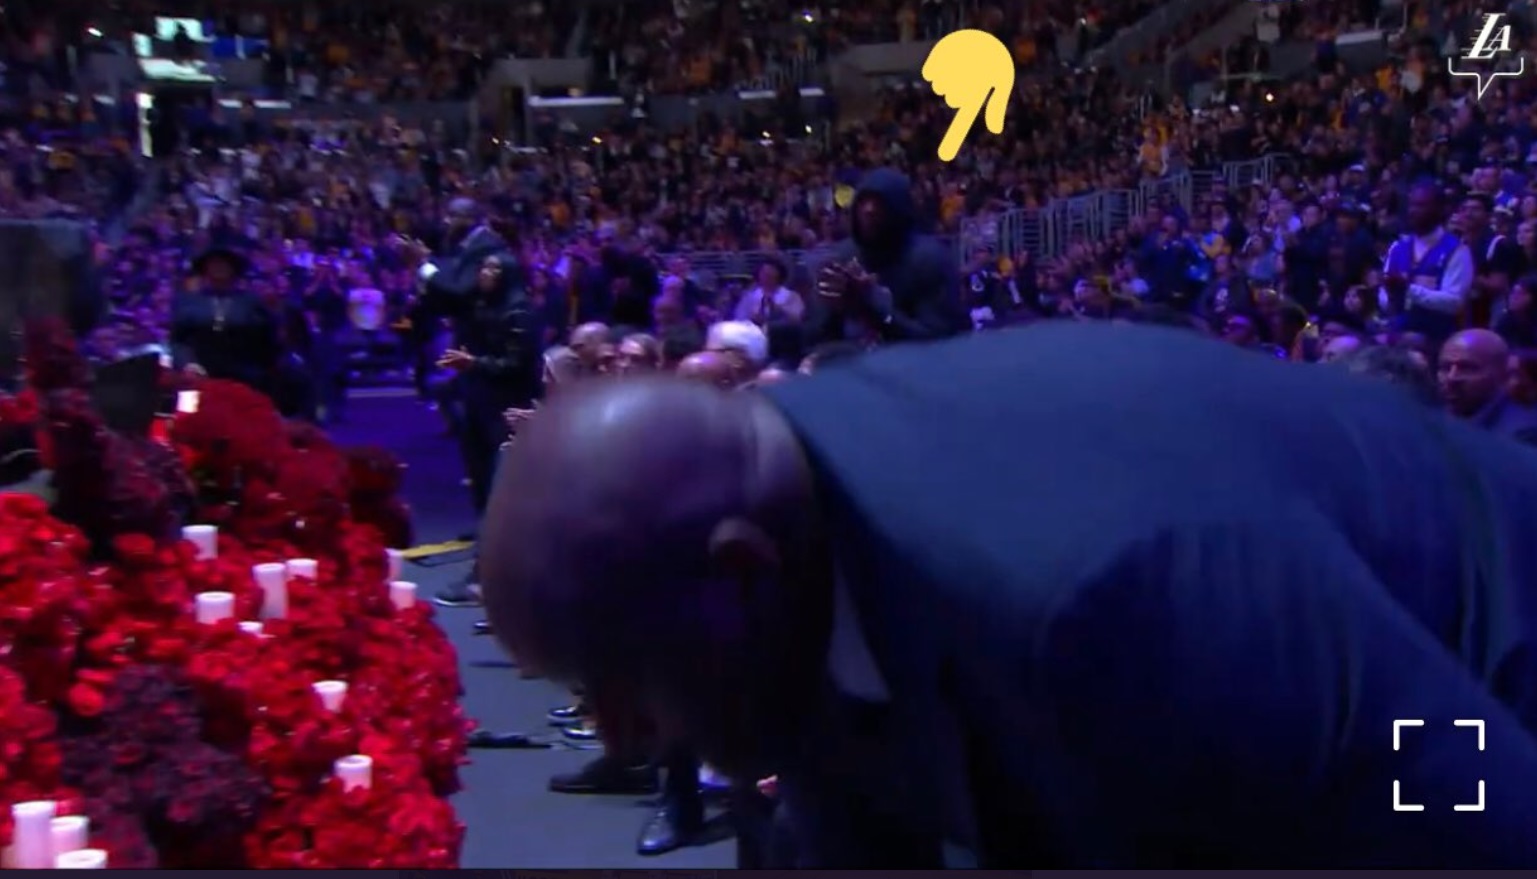 PHOTOS-Lebron-Was-At-Kobe-Memorial-Sitting-Next-To-Anthony-Davis-Was-Hiding-With-Black-Hoodie-Up-Asked-Camera-Not-To-Take-Pictures-Of-Him.jpg